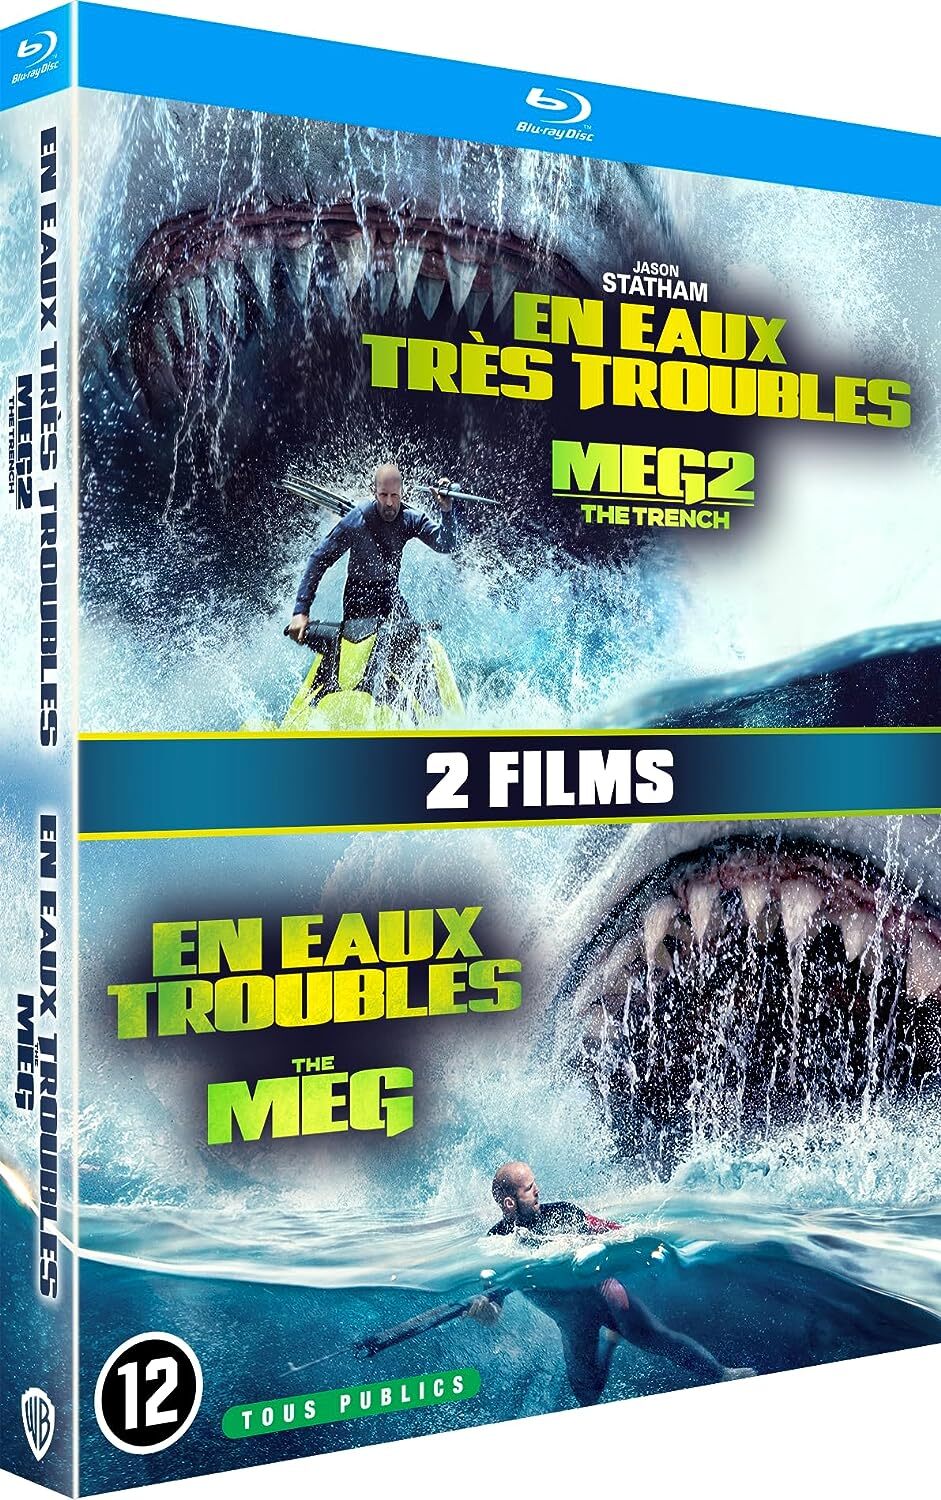 https://images.static-bluray.com/movies/covers/344874_front.jpg?t=1693546203